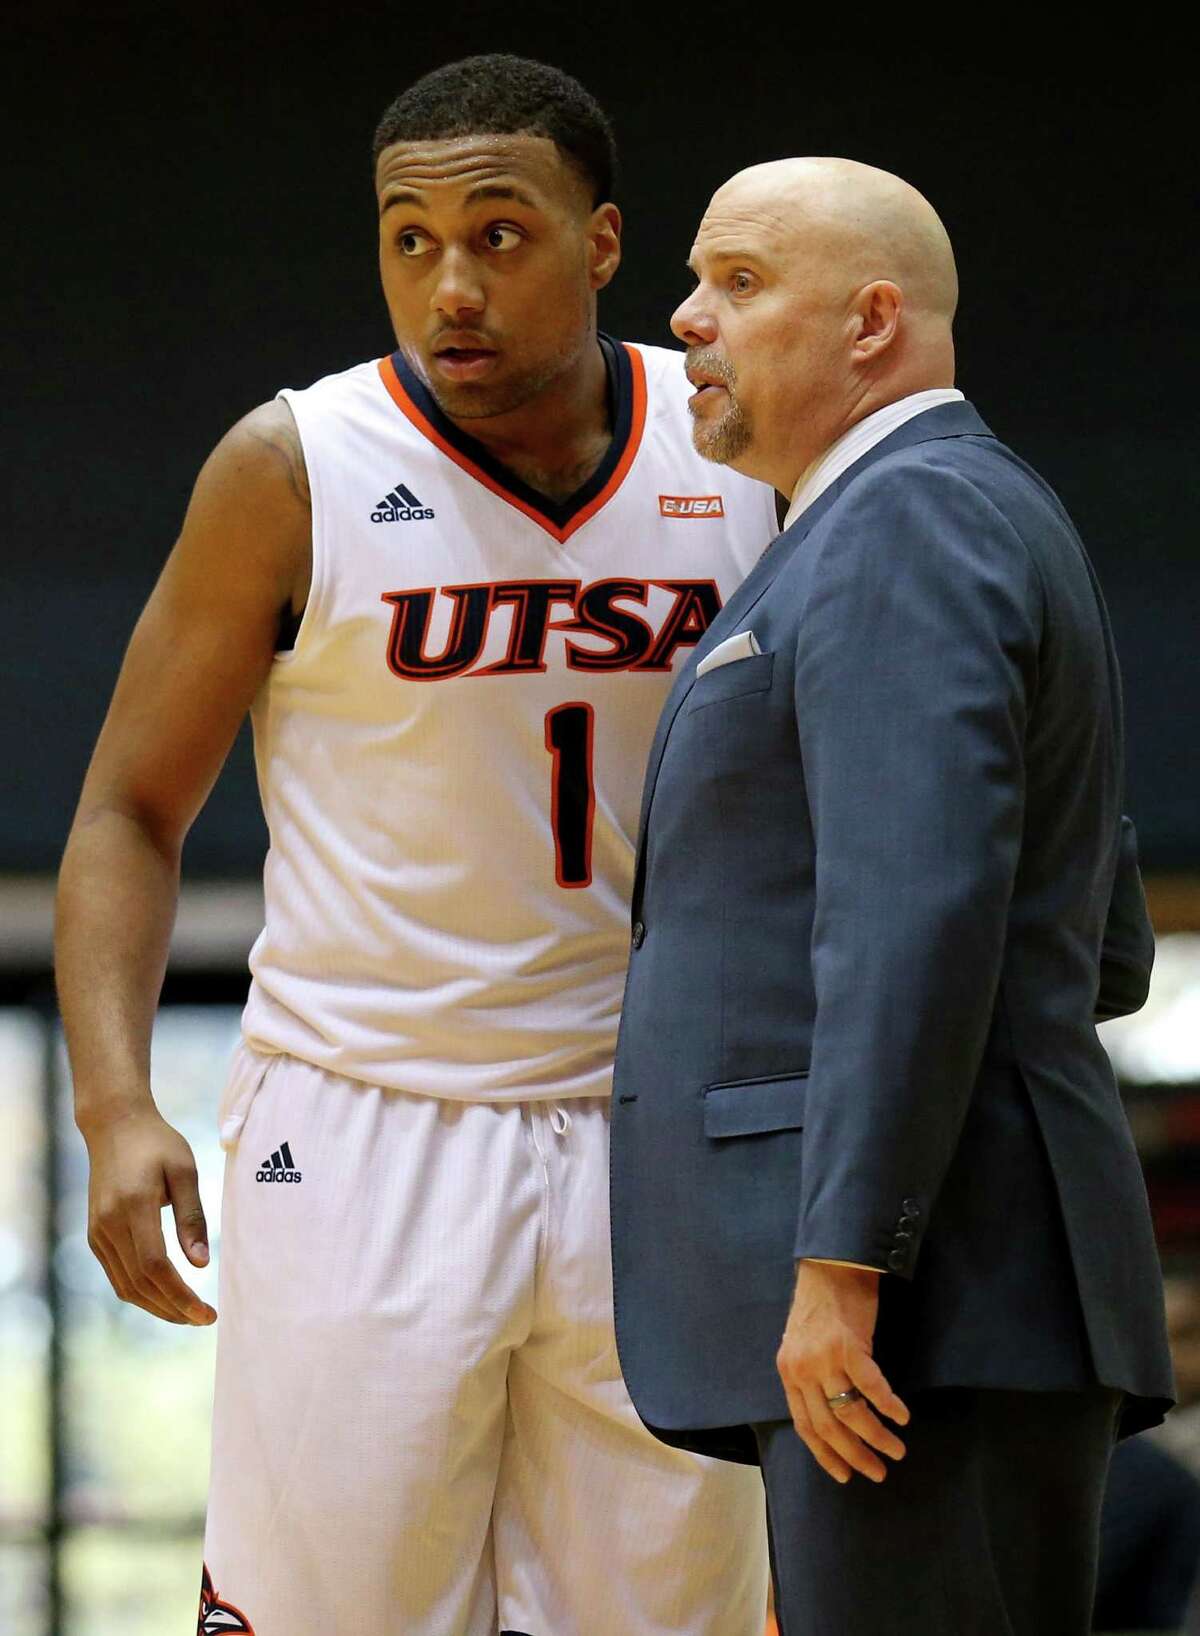 UTSA’s Jeff Beverly talks with head coach Steve Henson during second half action against UTEP on Jan. 1, 2017 at the Convocation Center. UTSA won 67-55.